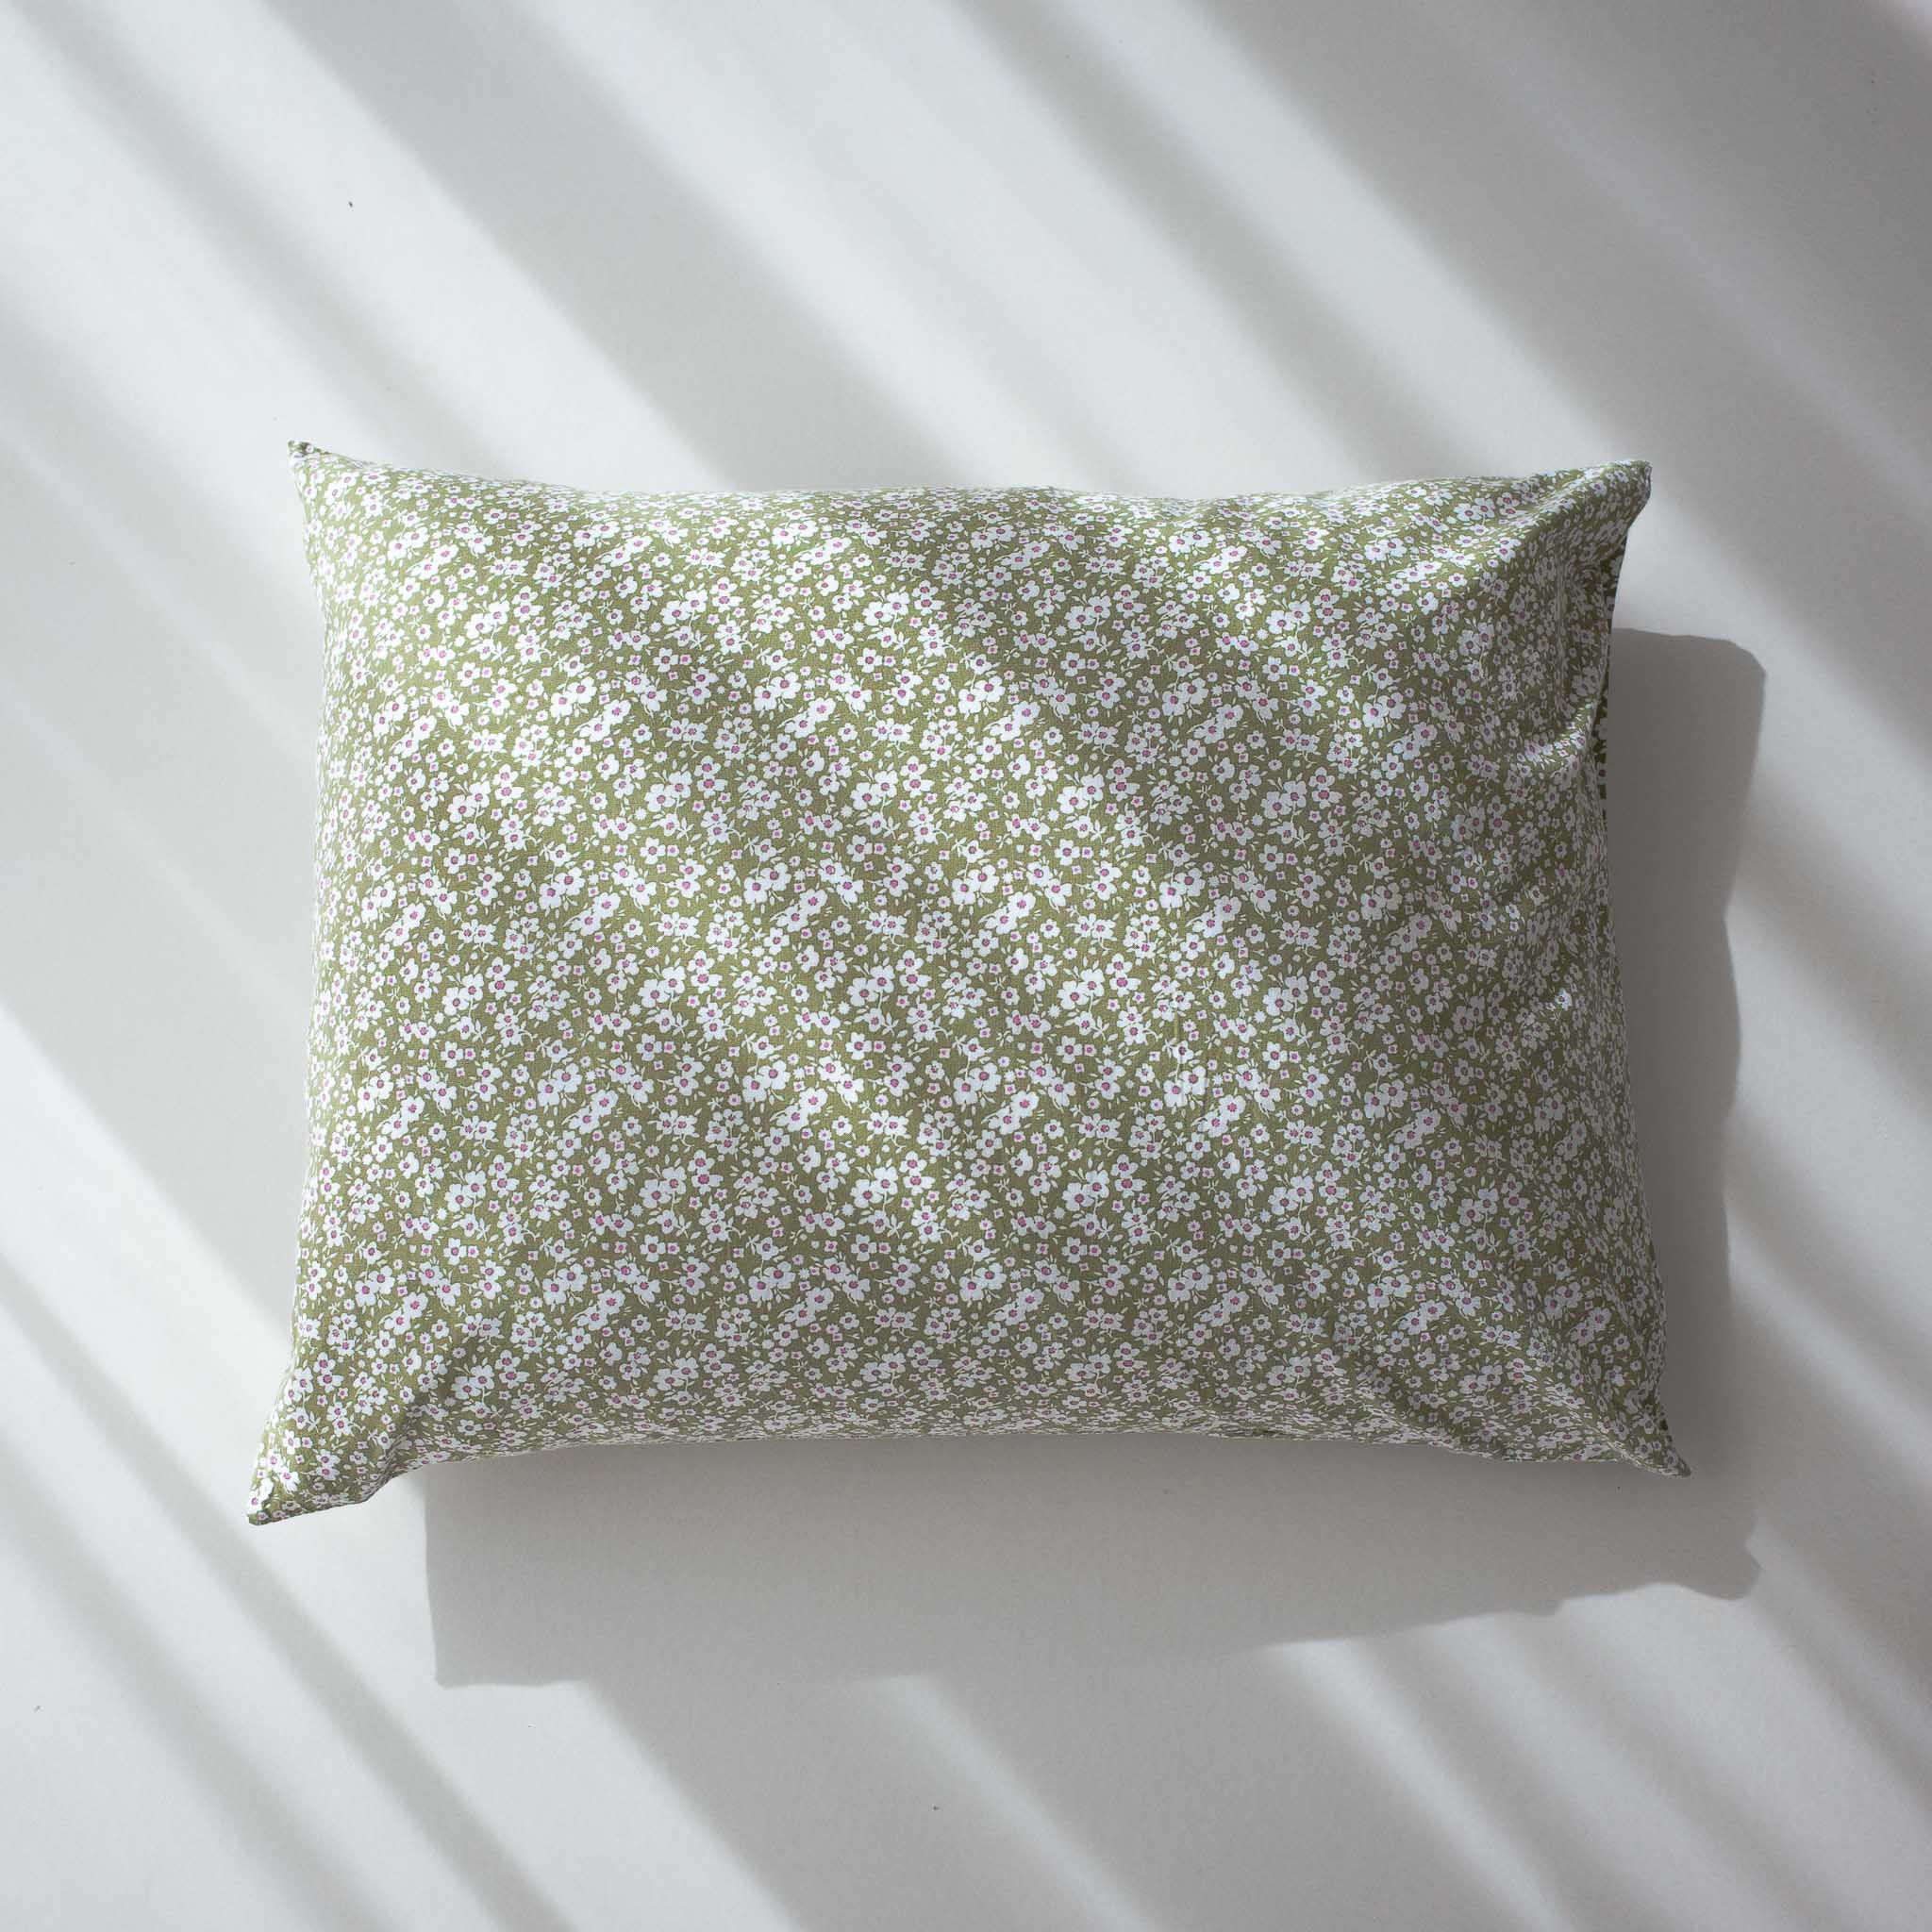 Pillow Cases - Flowery Green